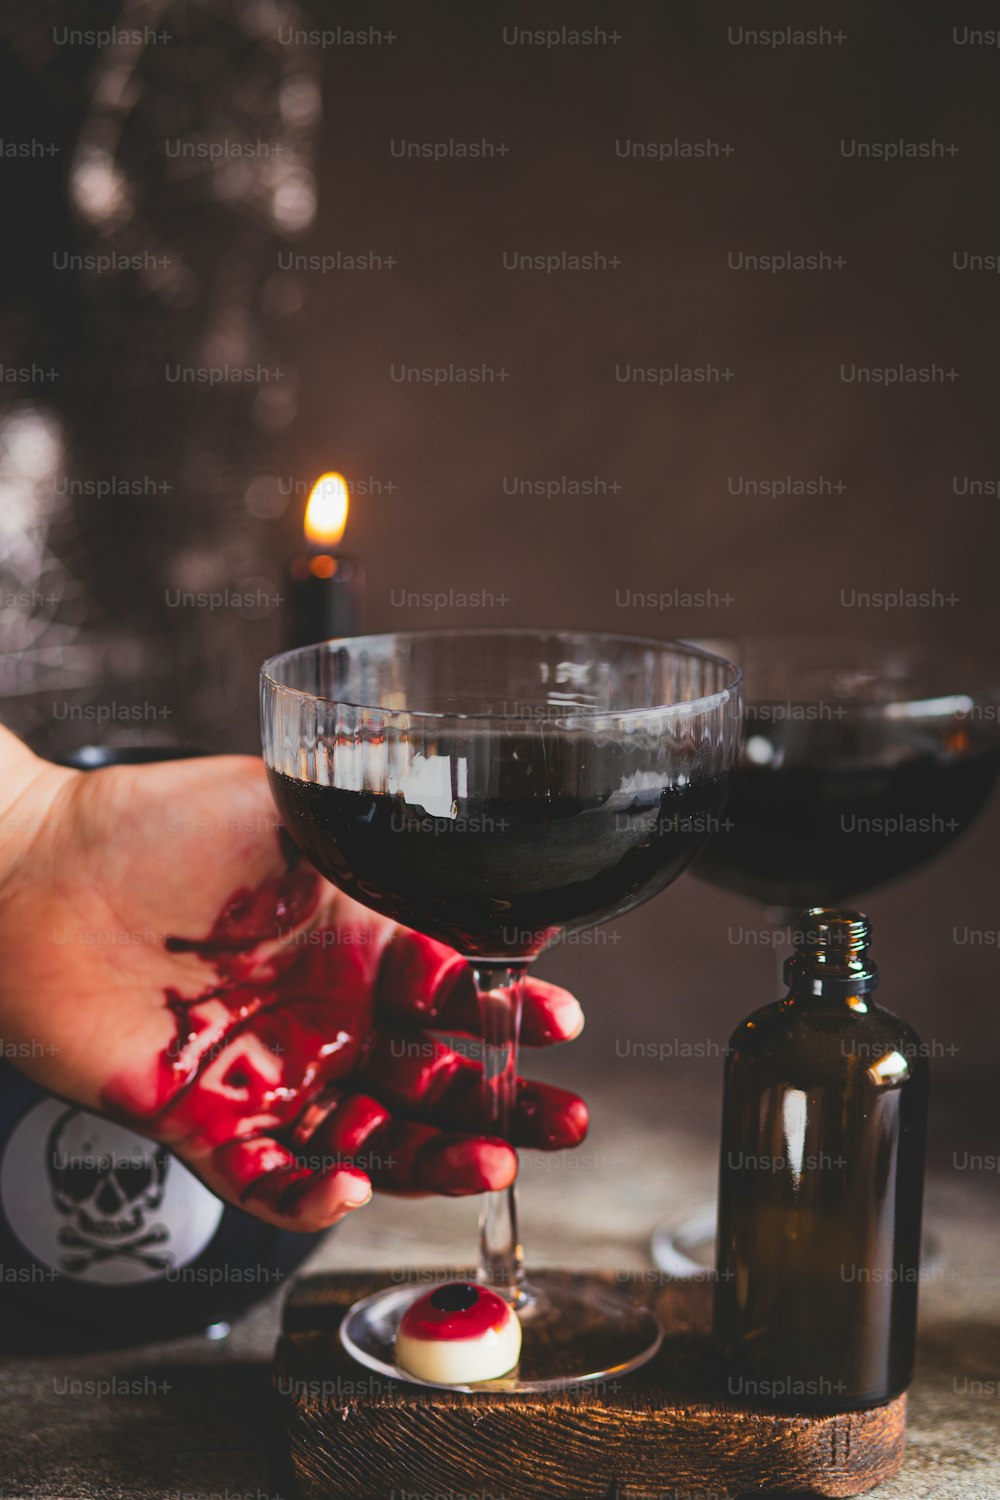 a person holding a glass of wine next to a bottle of wine